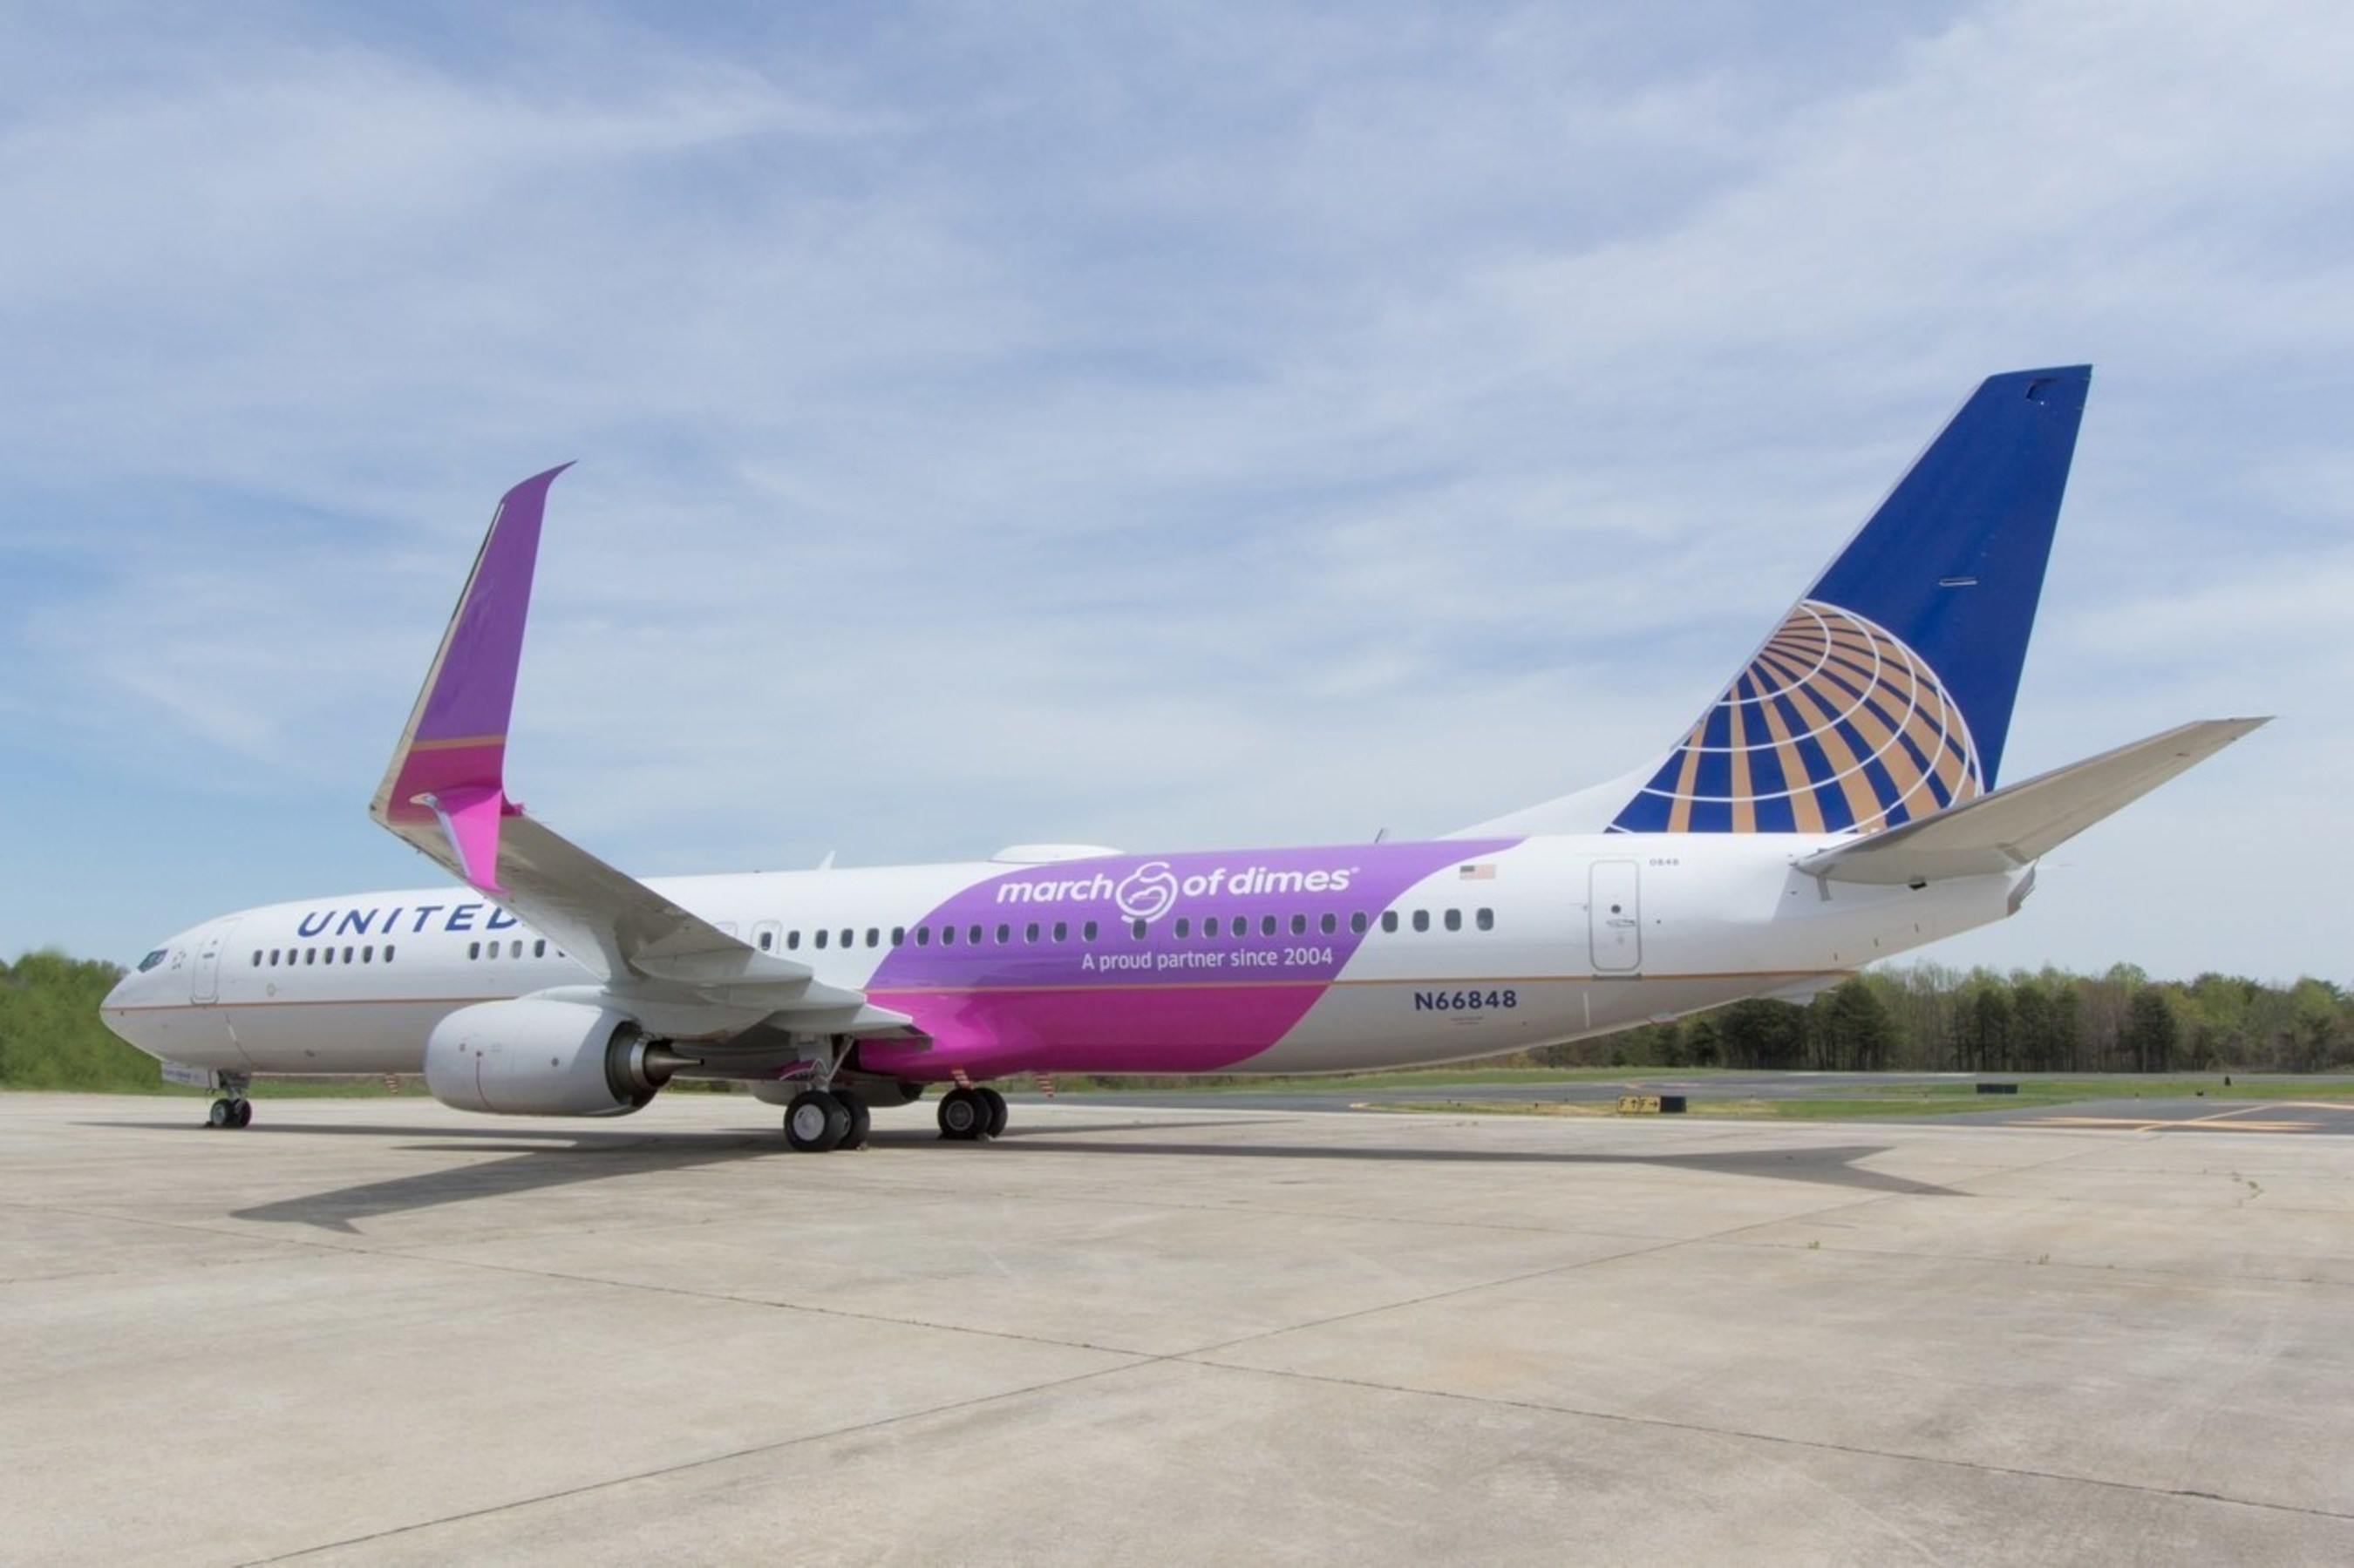 United's March of Dimes commemorative aircraft, FAA N registration #66848.